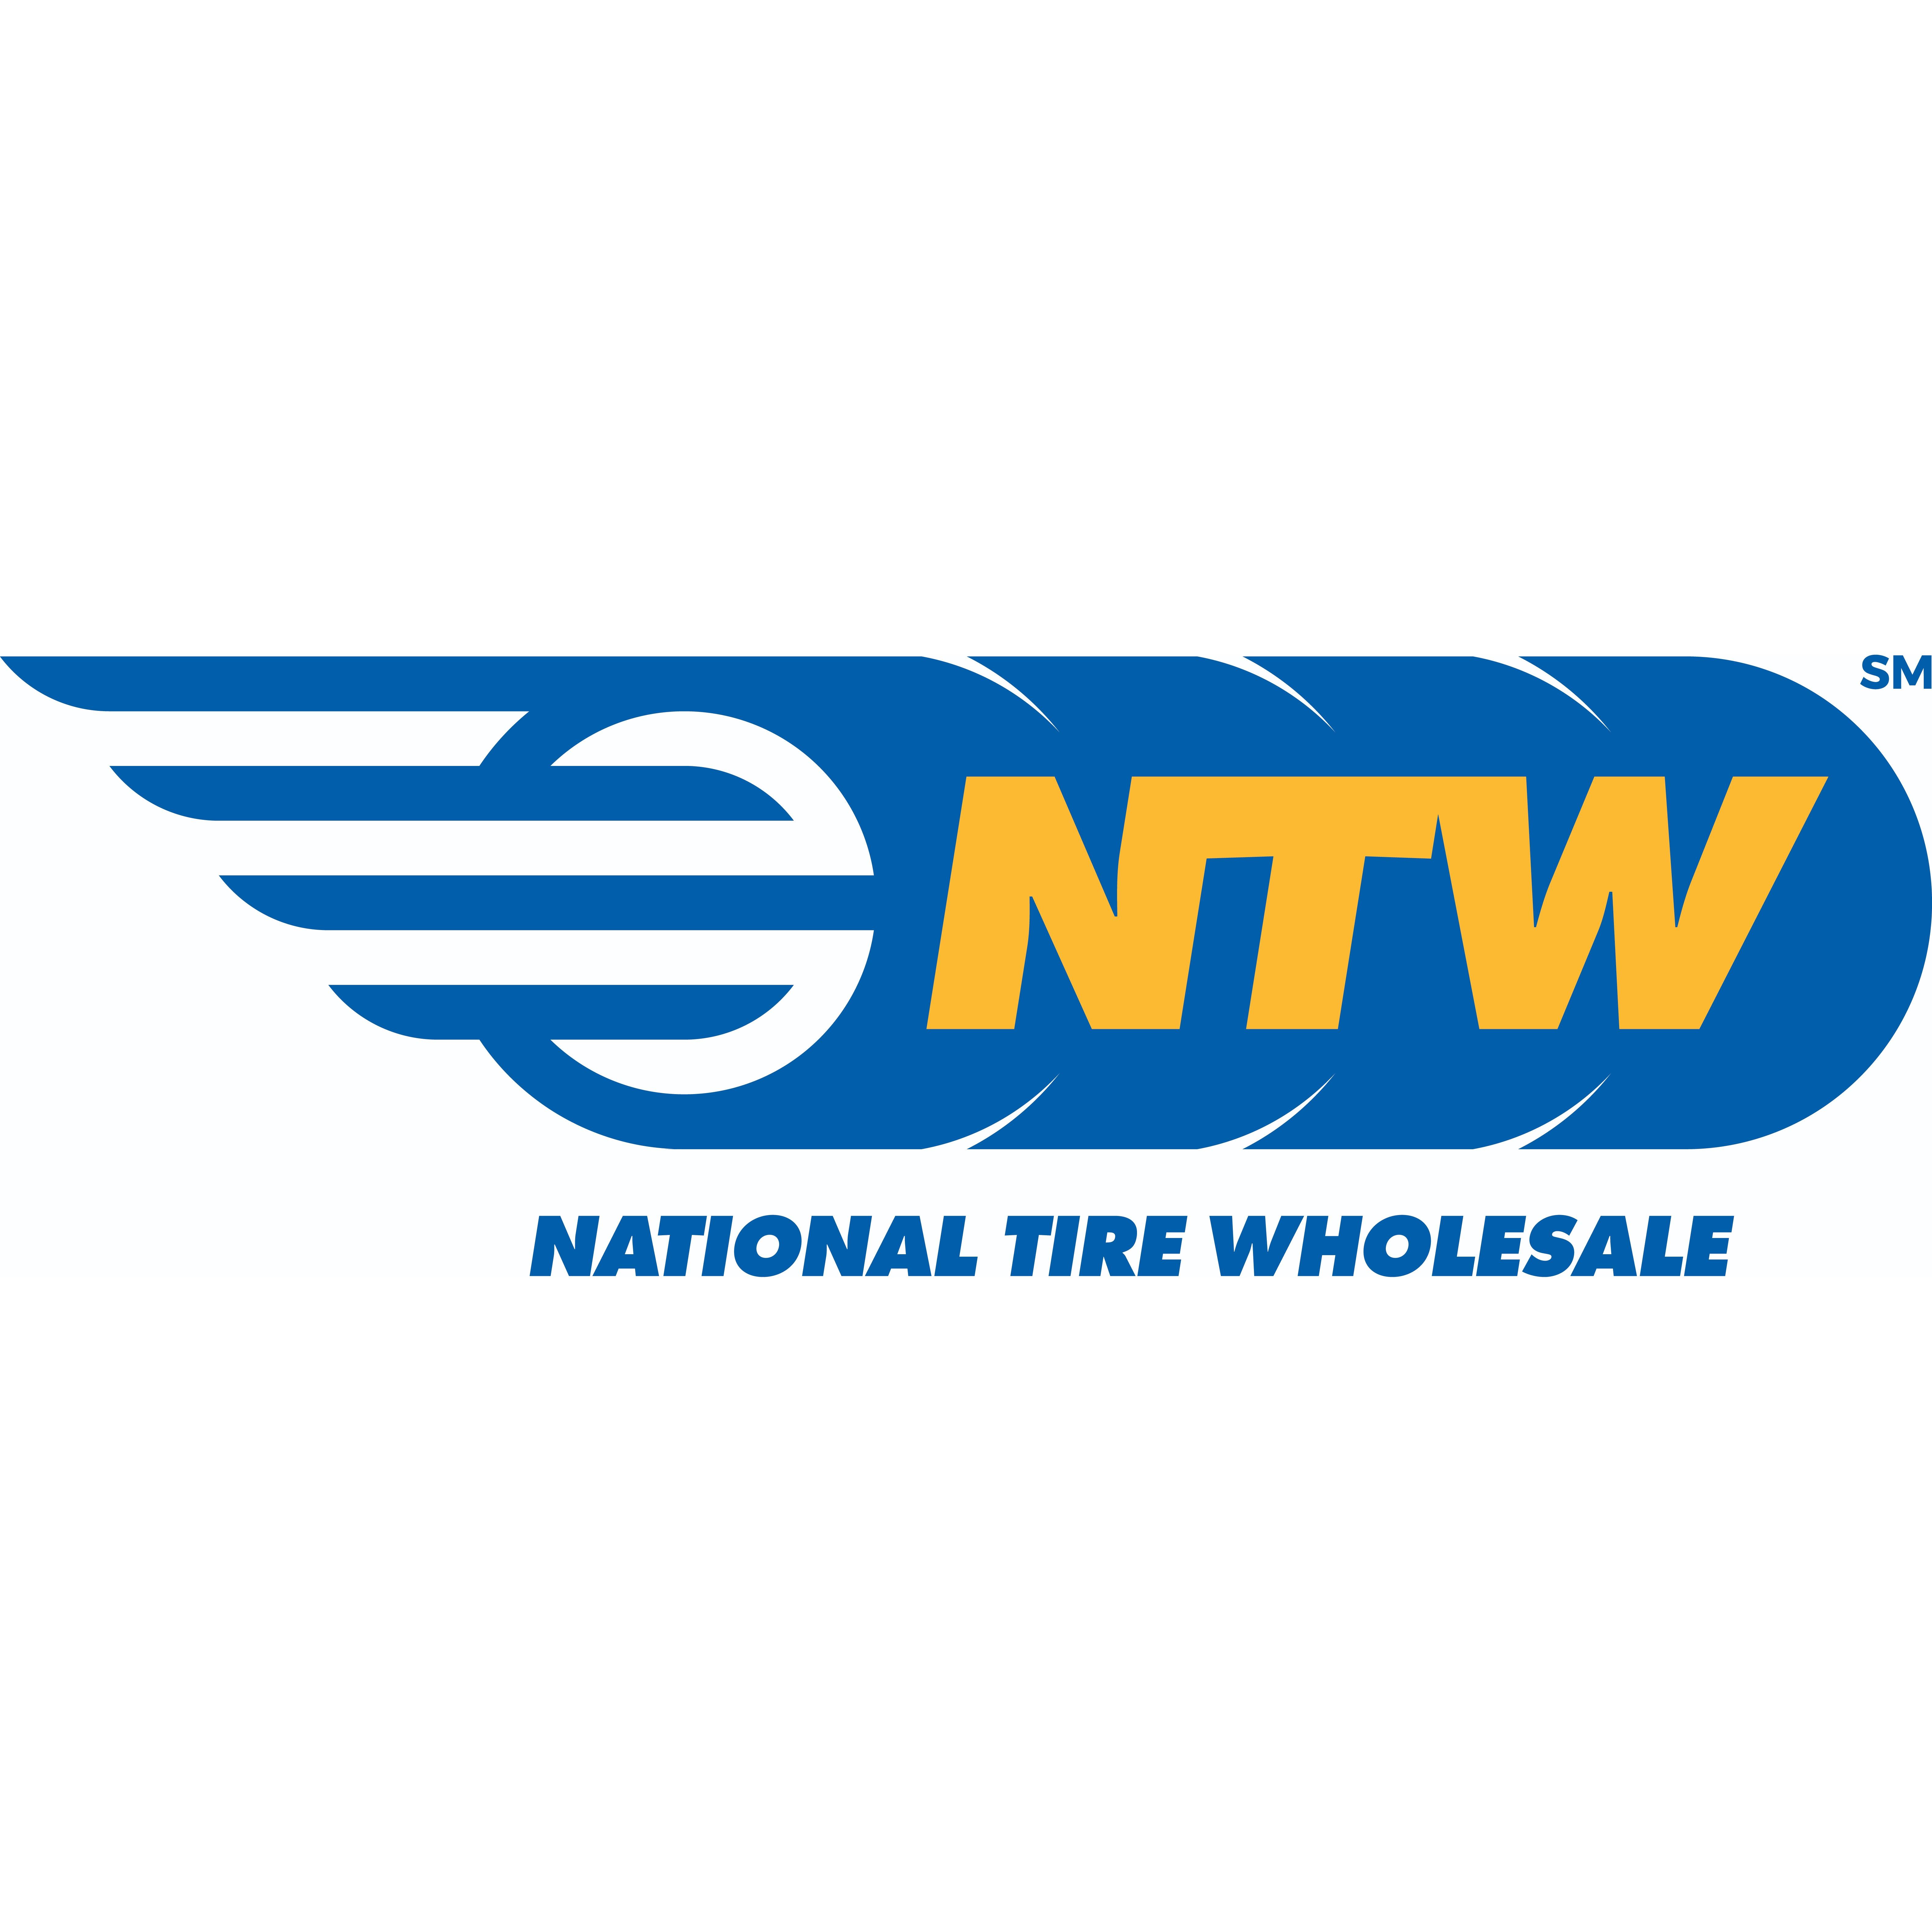 NTW - National Tire Wholesale - Columbia, MO 65202 - (800)735-5632 | ShowMeLocal.com